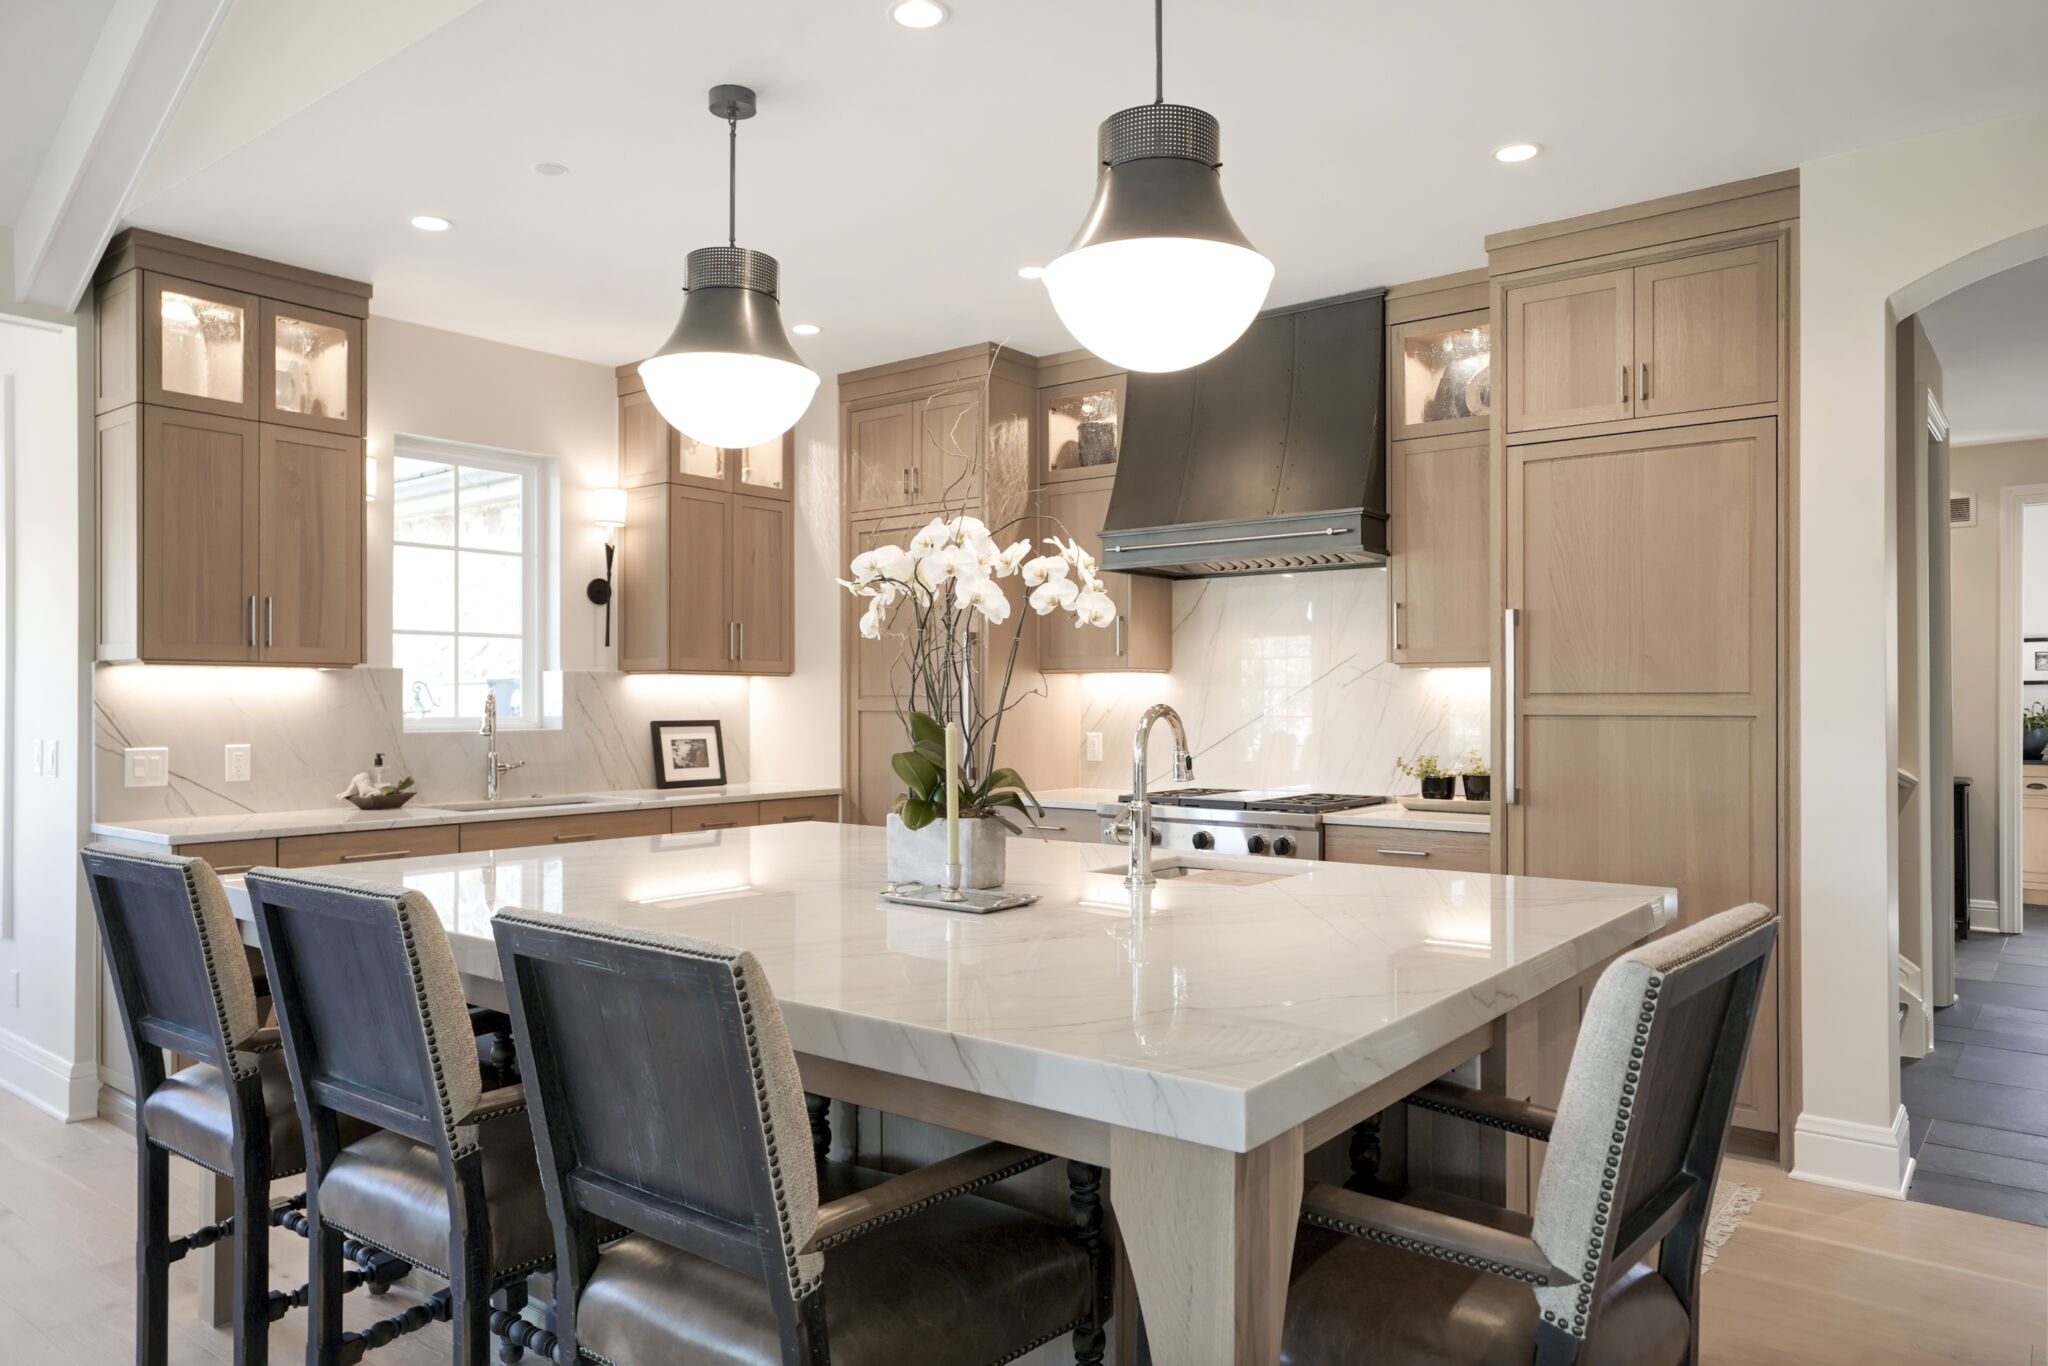 BKC Kitchen and Bath transitional kitchen with light wood cabinets, large center island and metal pendant lights